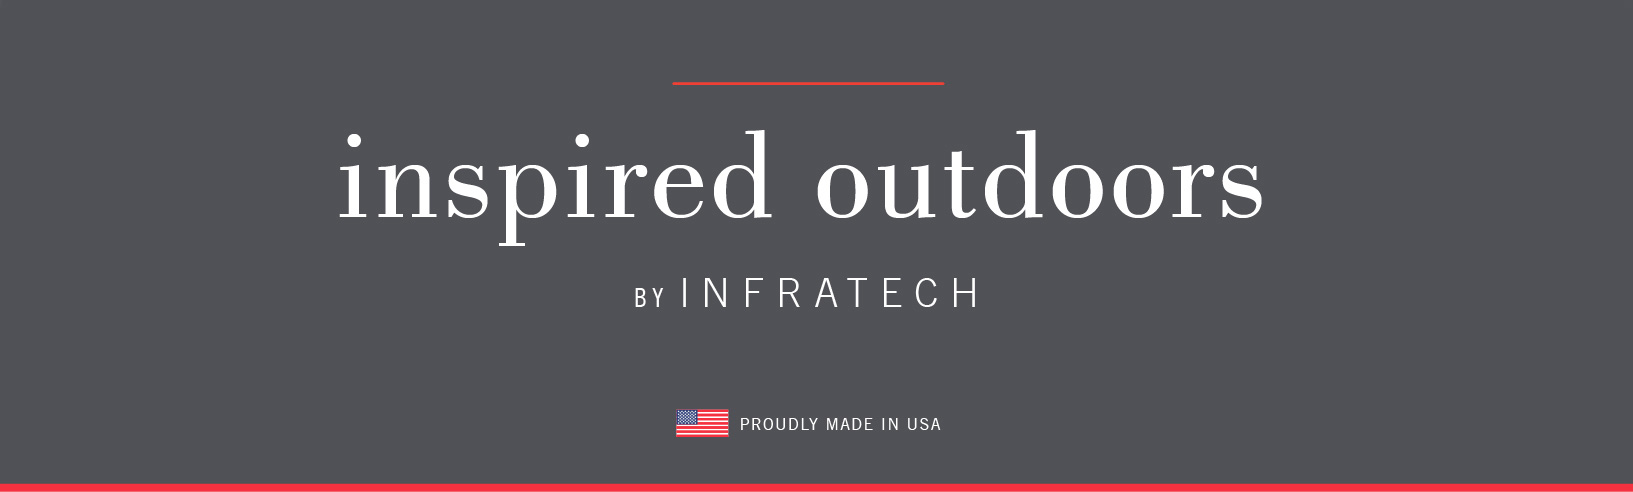 Inspired Outdoors by Infratech | Proudly made in USA